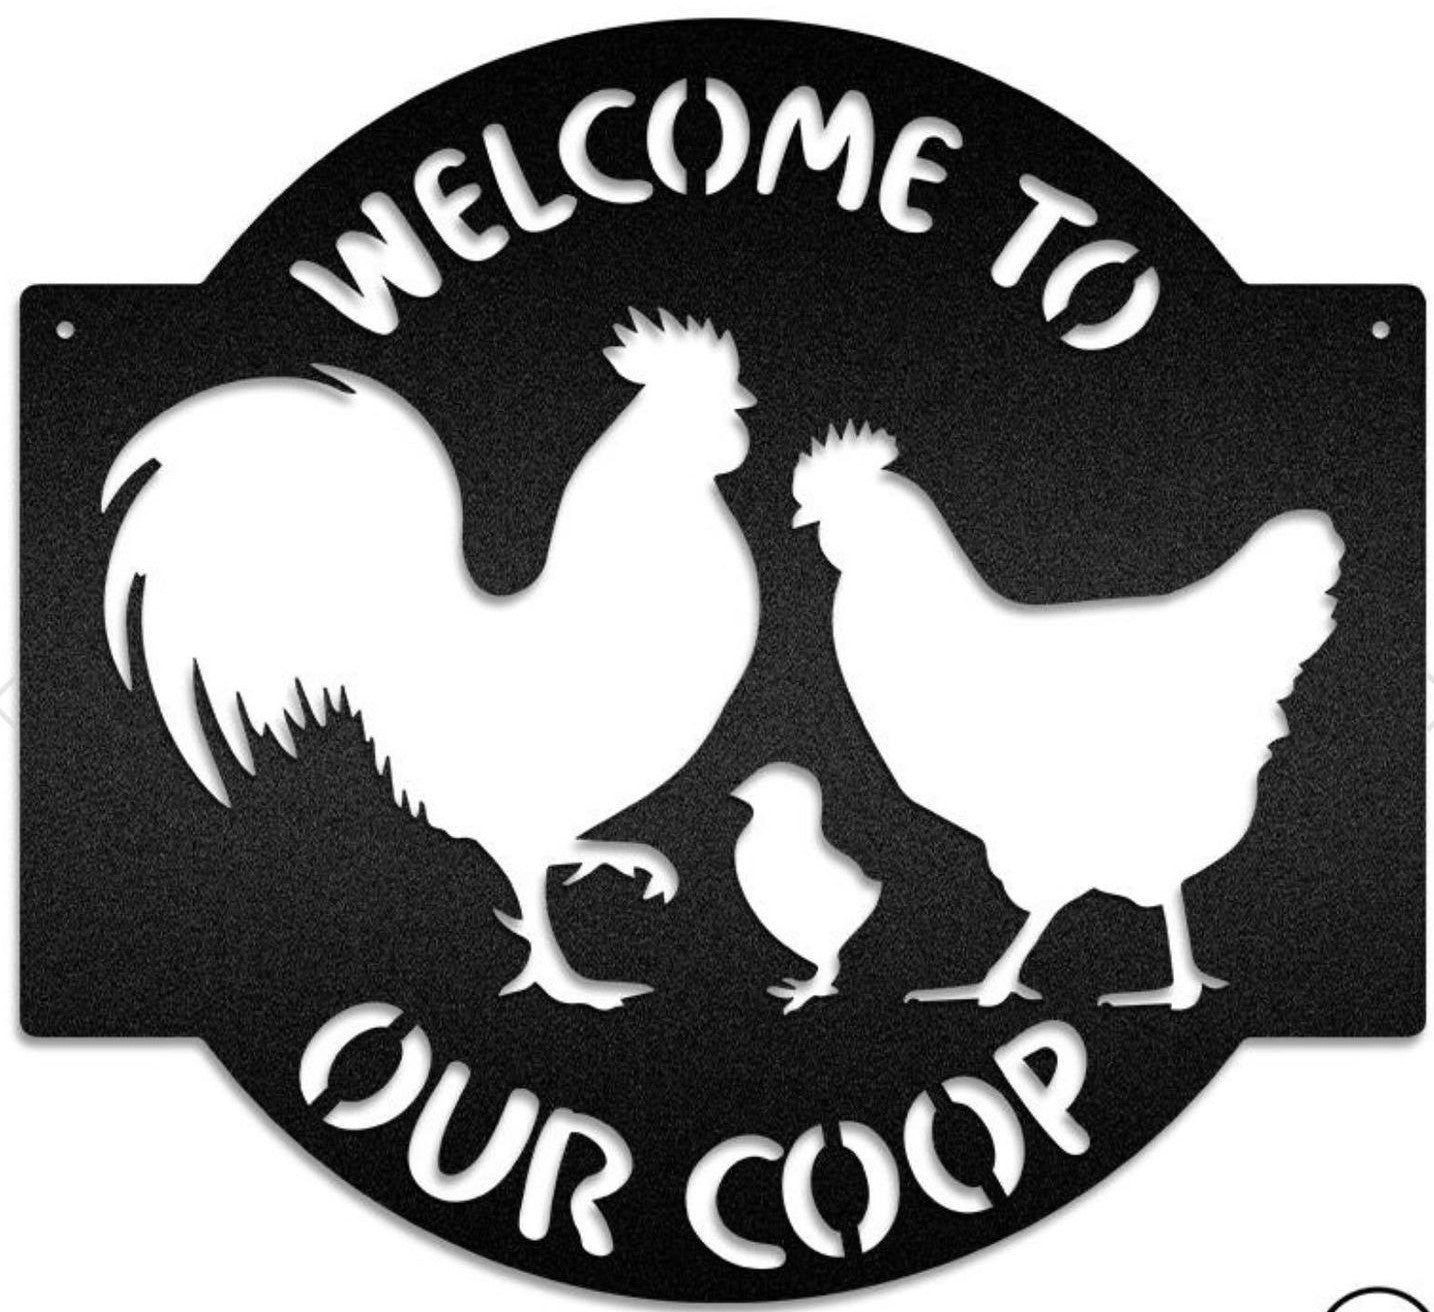 Welcome to our coop sign